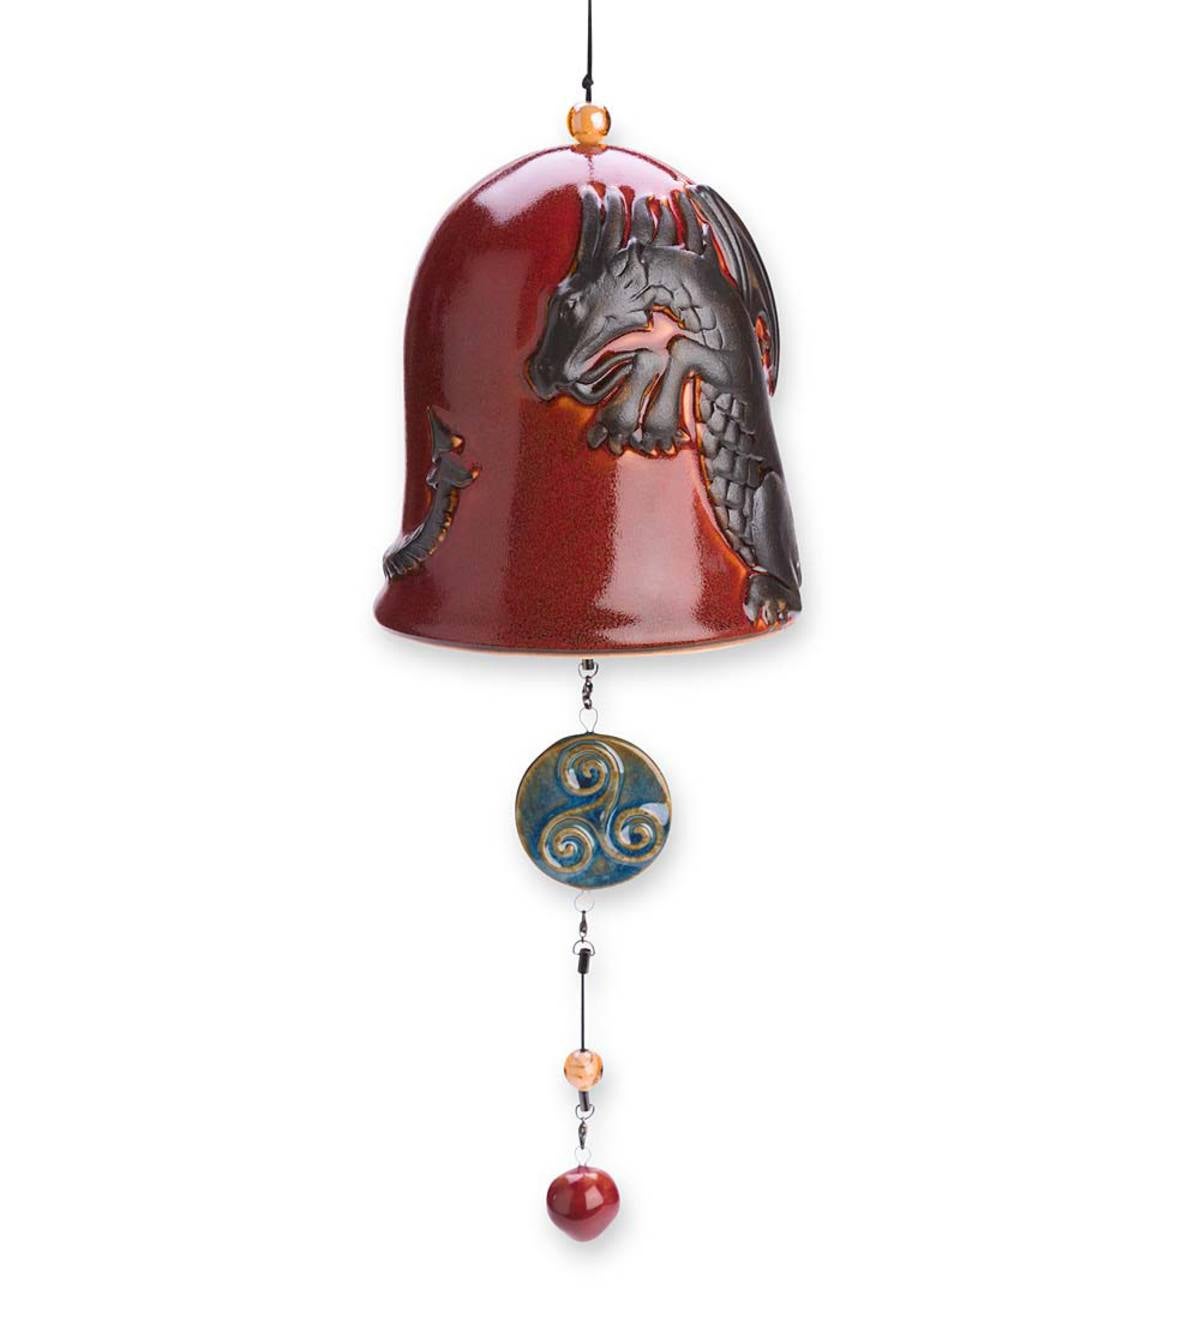 Dragon Whispering Bell - Free 2 Day Delivery - Red